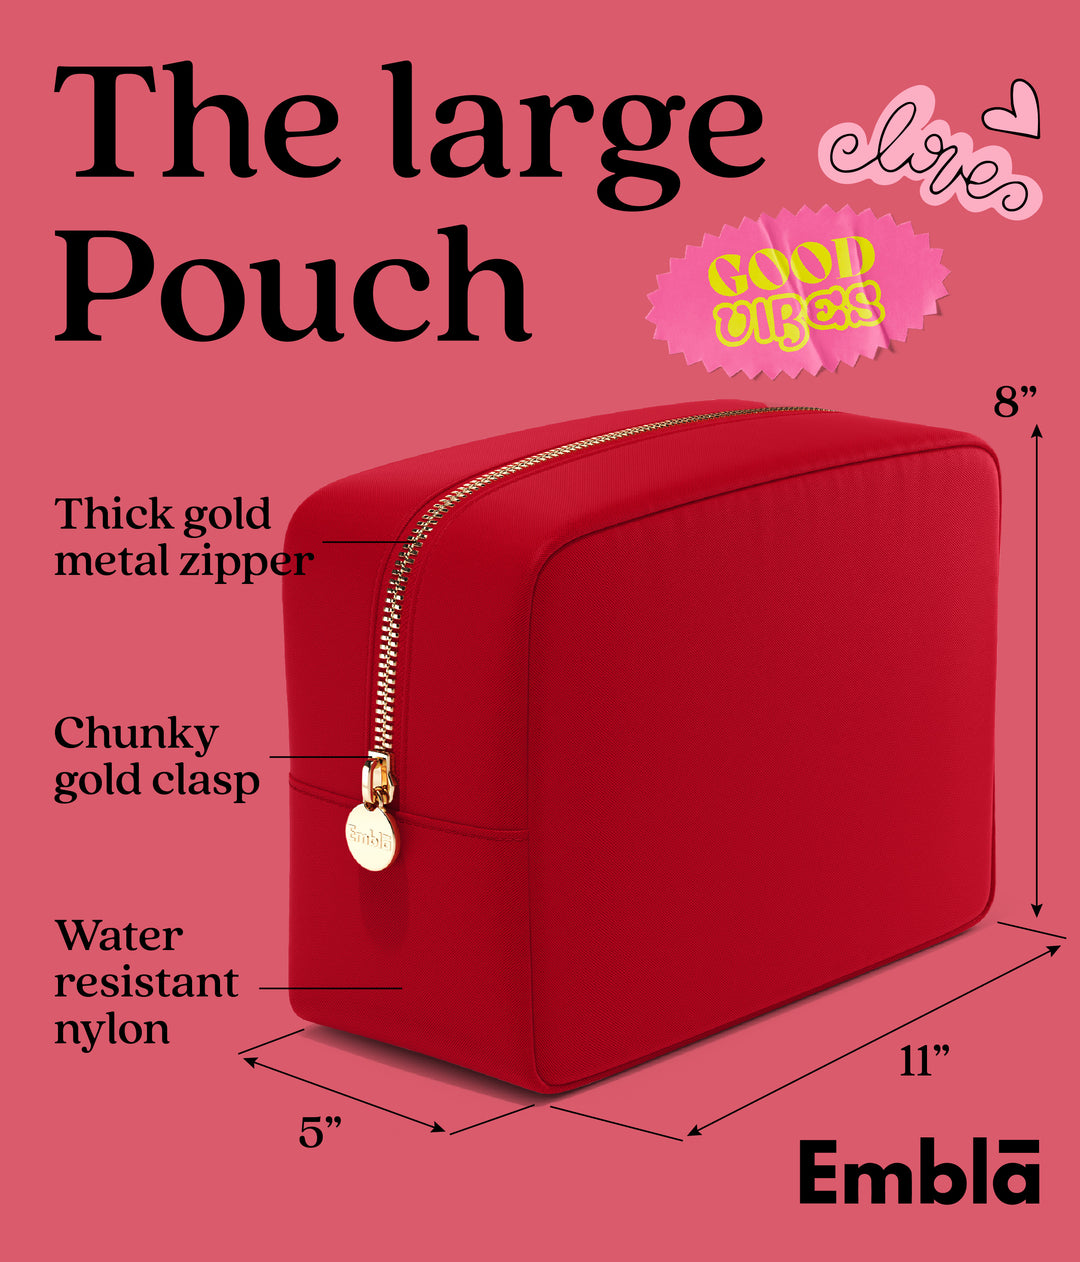 The Large Ruby Pouch